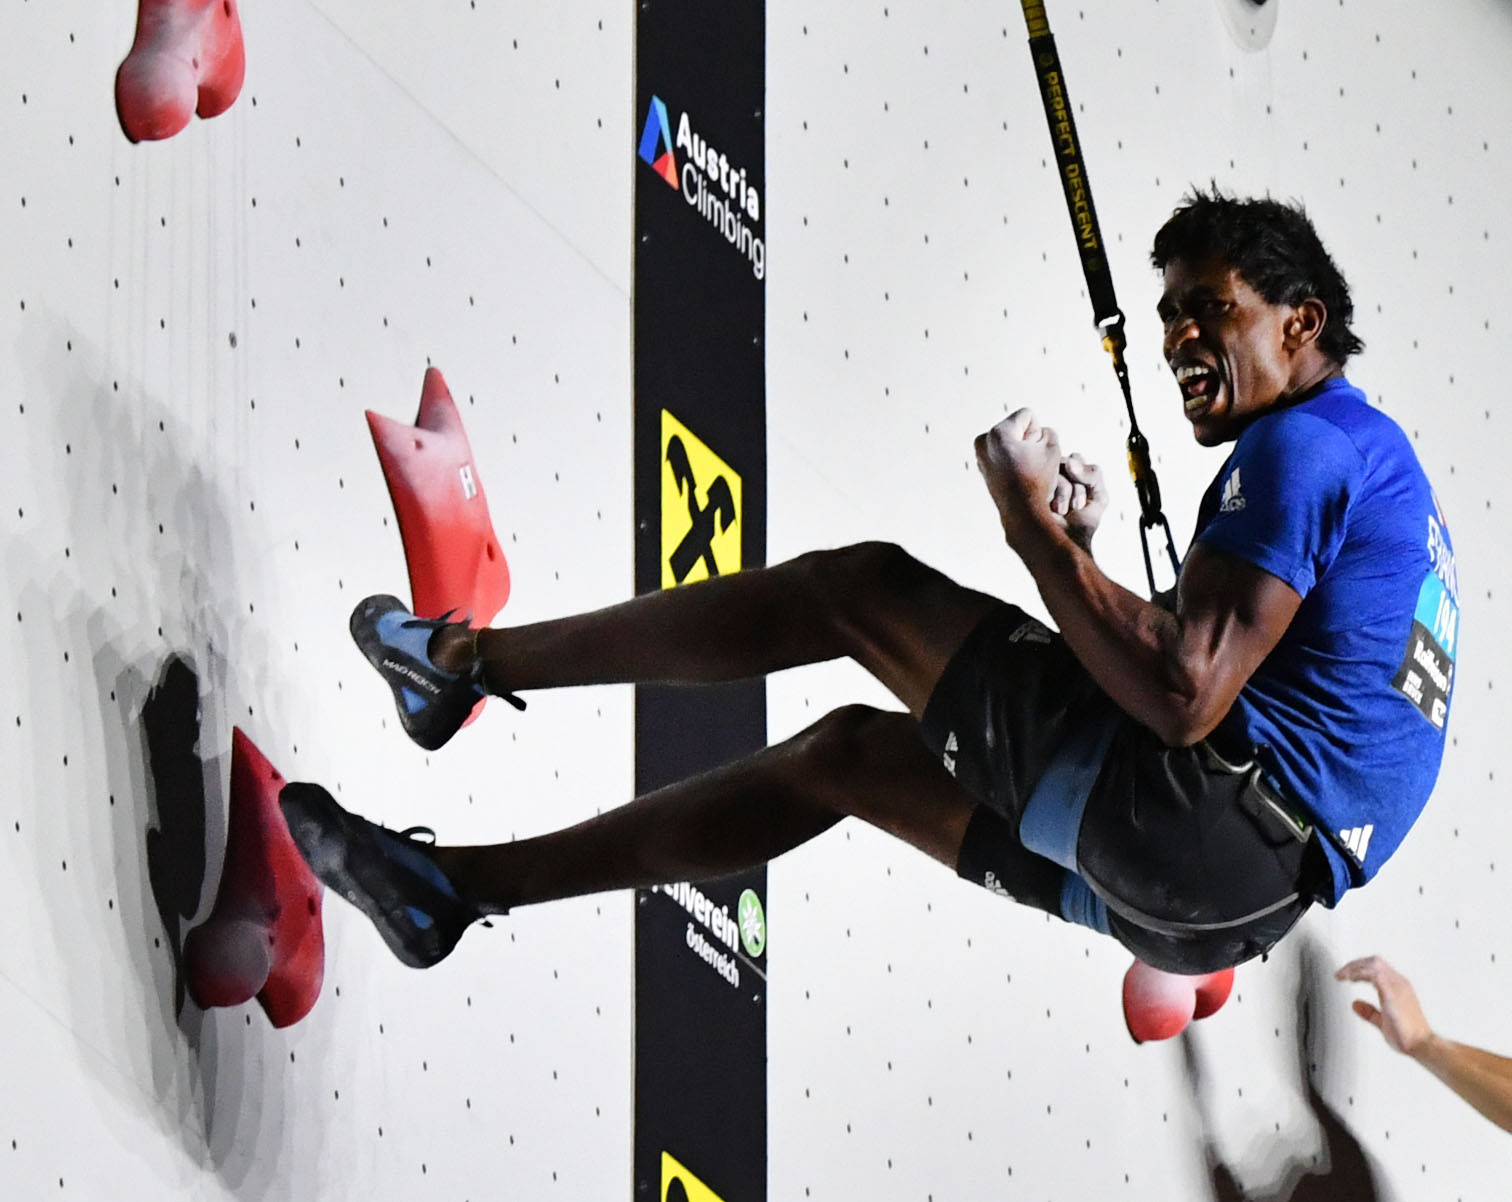 France's Bassa Mawem won the men's speed final at the  IFSC Climbing World Cup in Moscow ©Getty Images